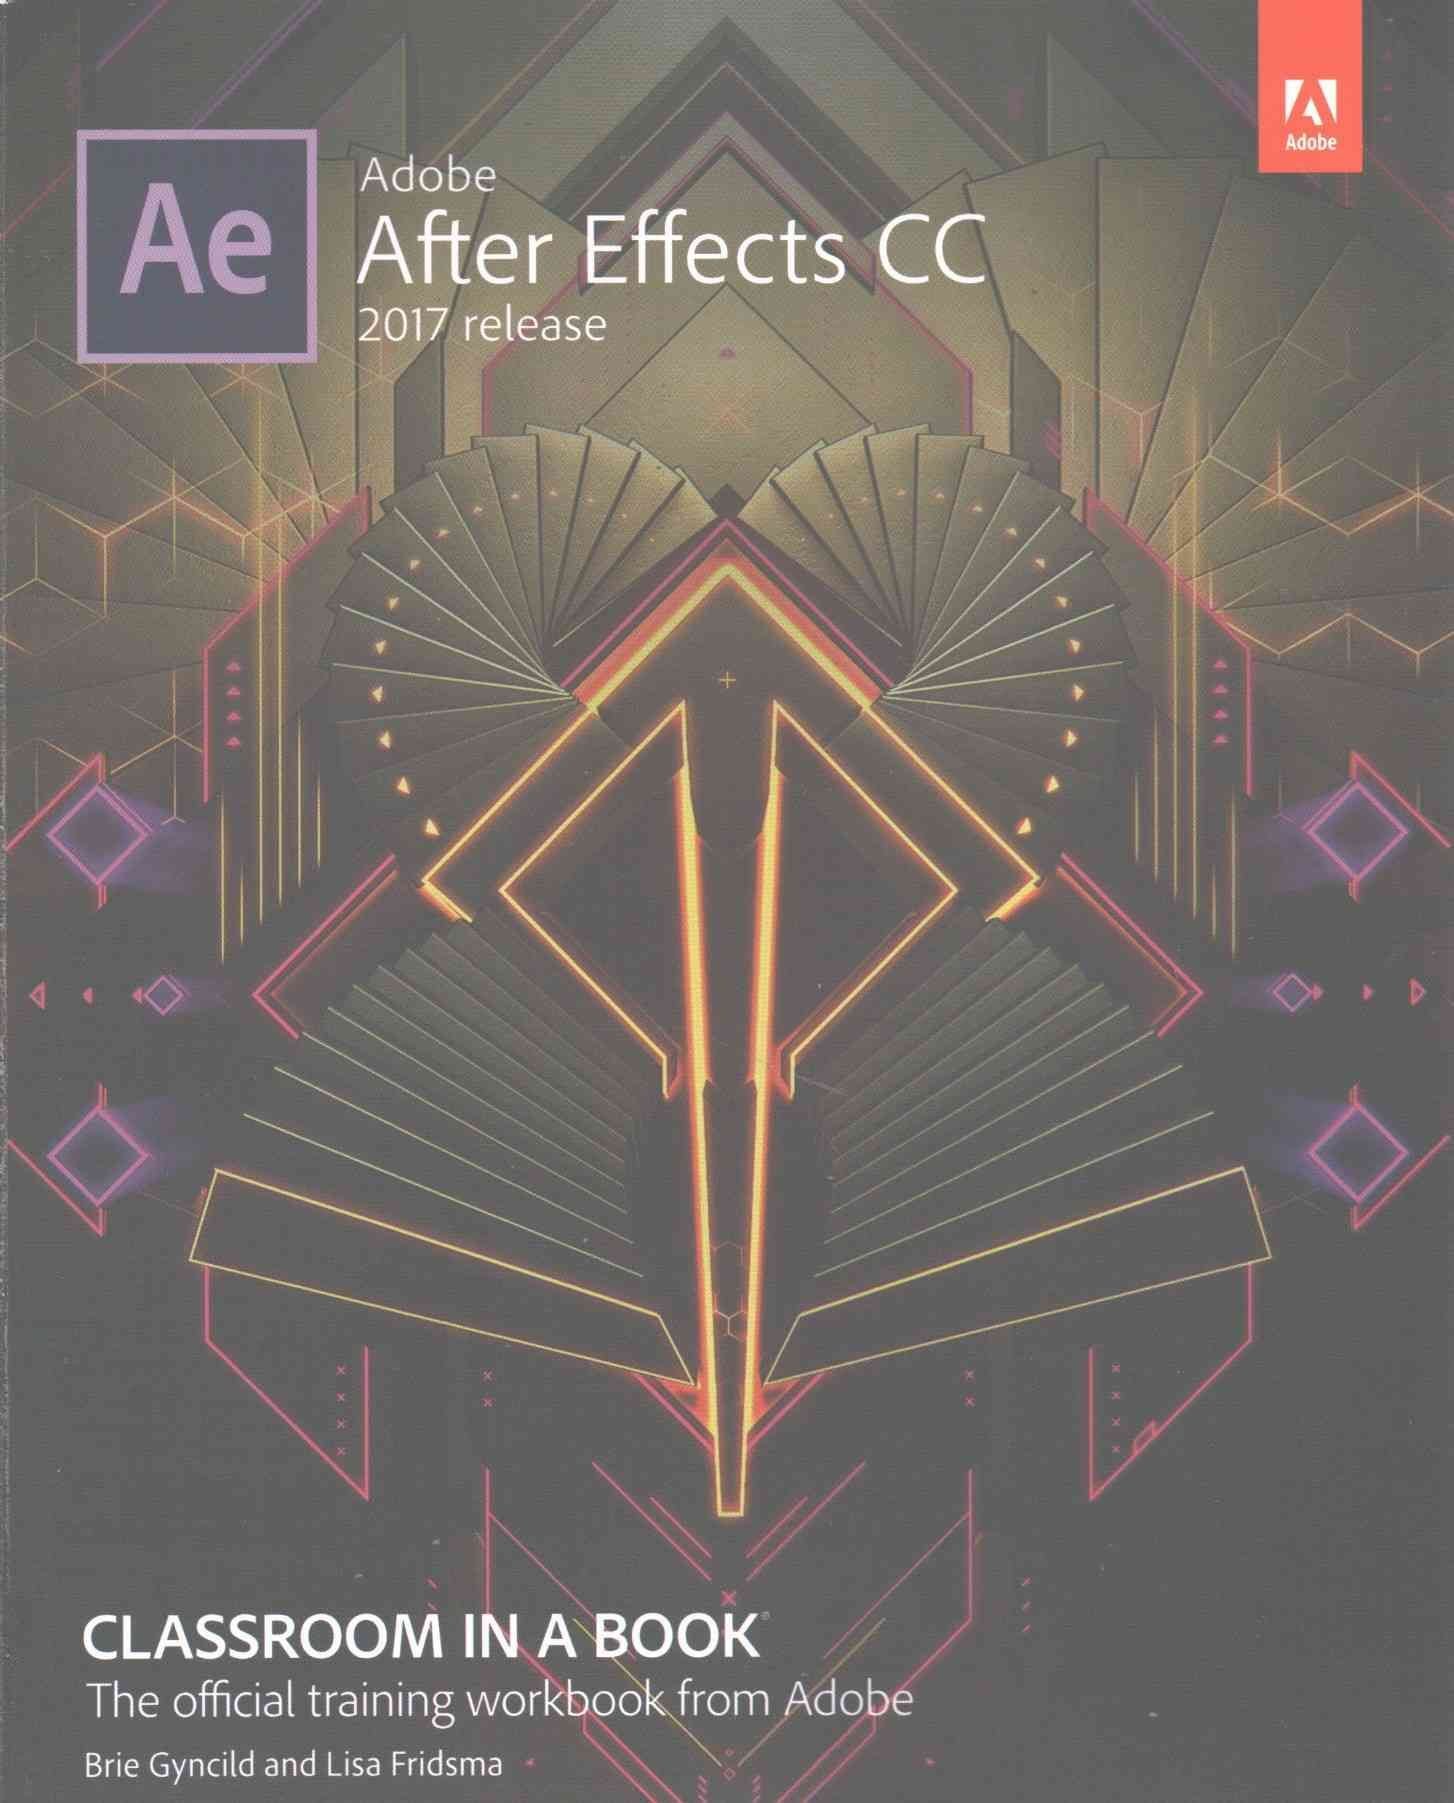 Adobe After Effects CC Classroom in a Book (2017 release)